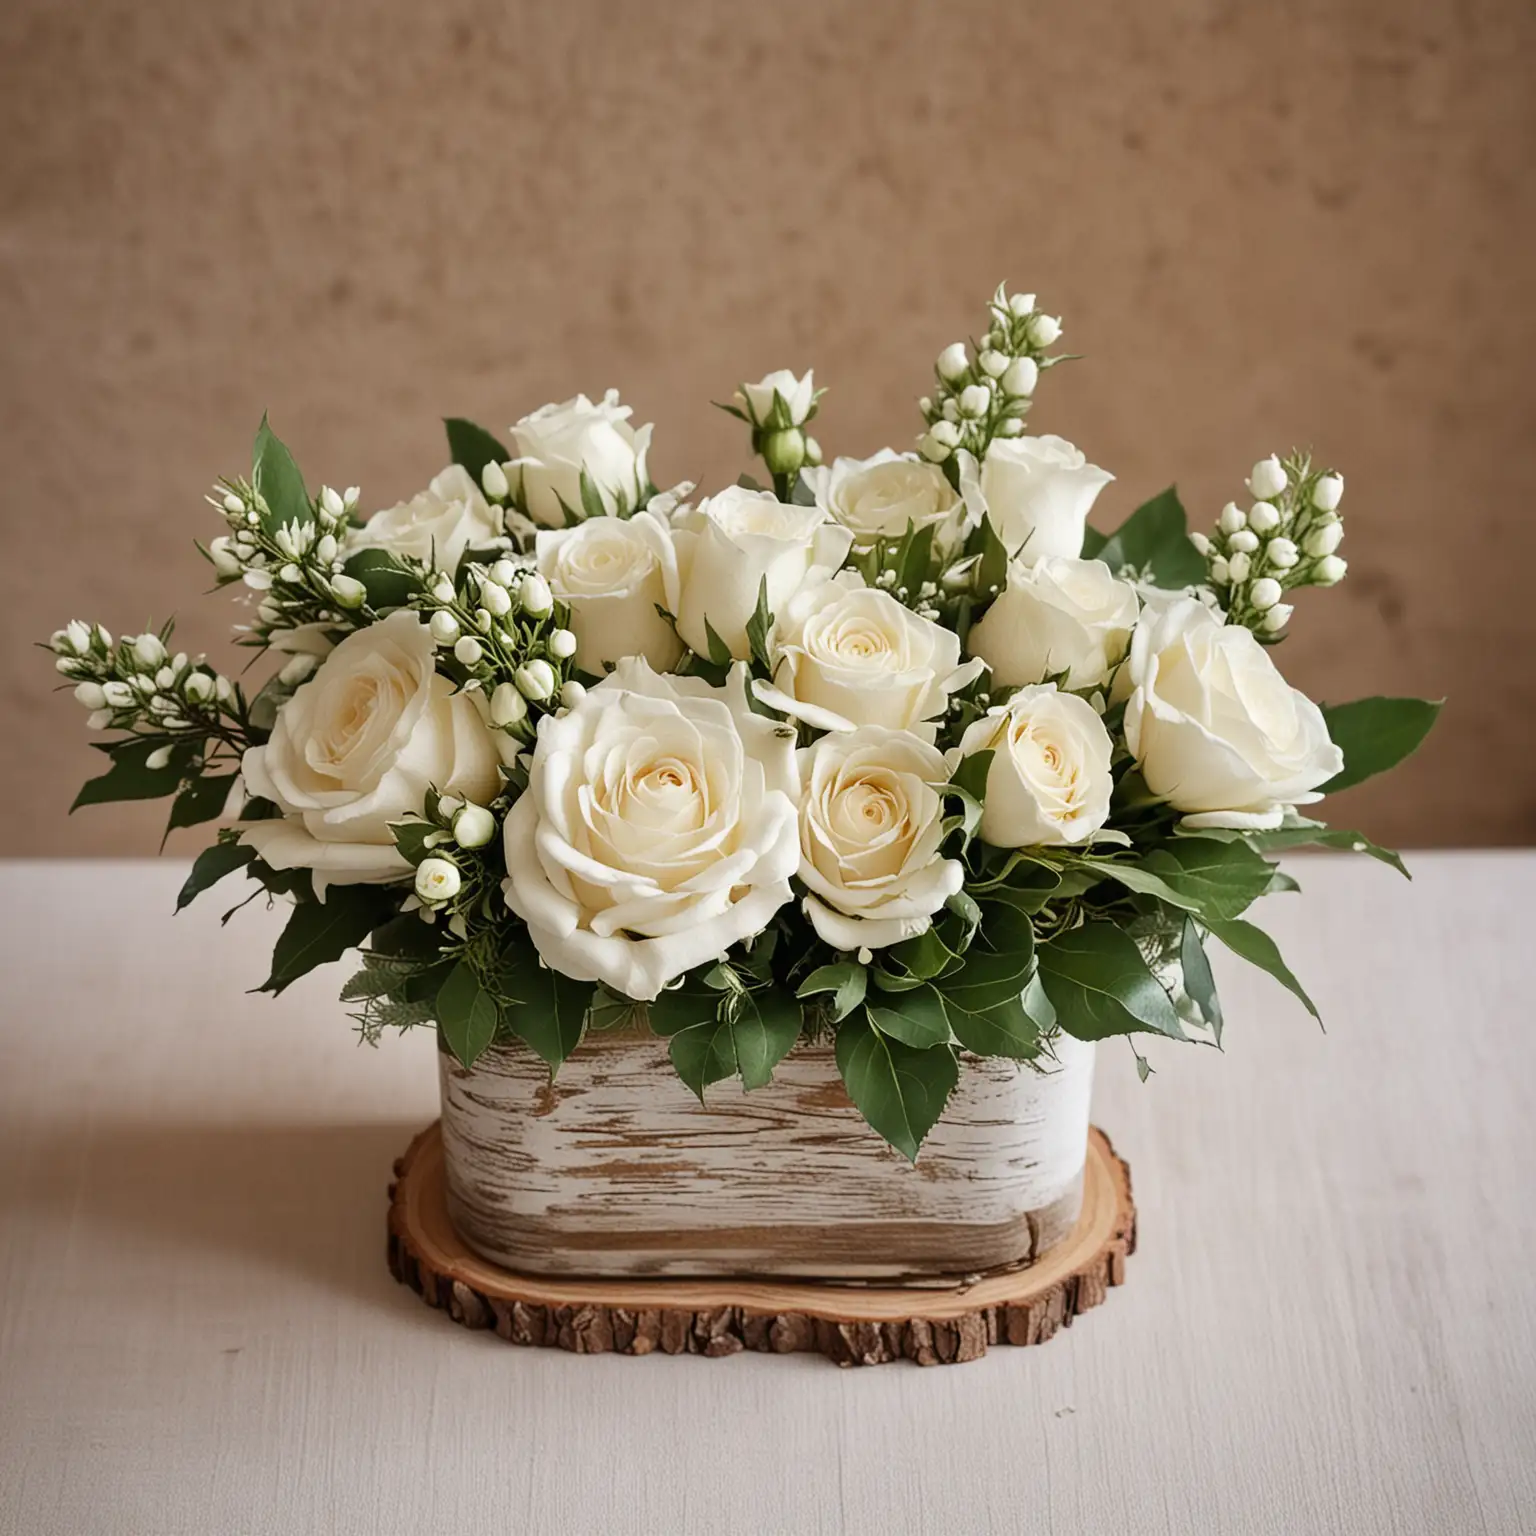 simple and small rustic white winter wedding centerpiece with blossoms a few white roses; make the background neutral